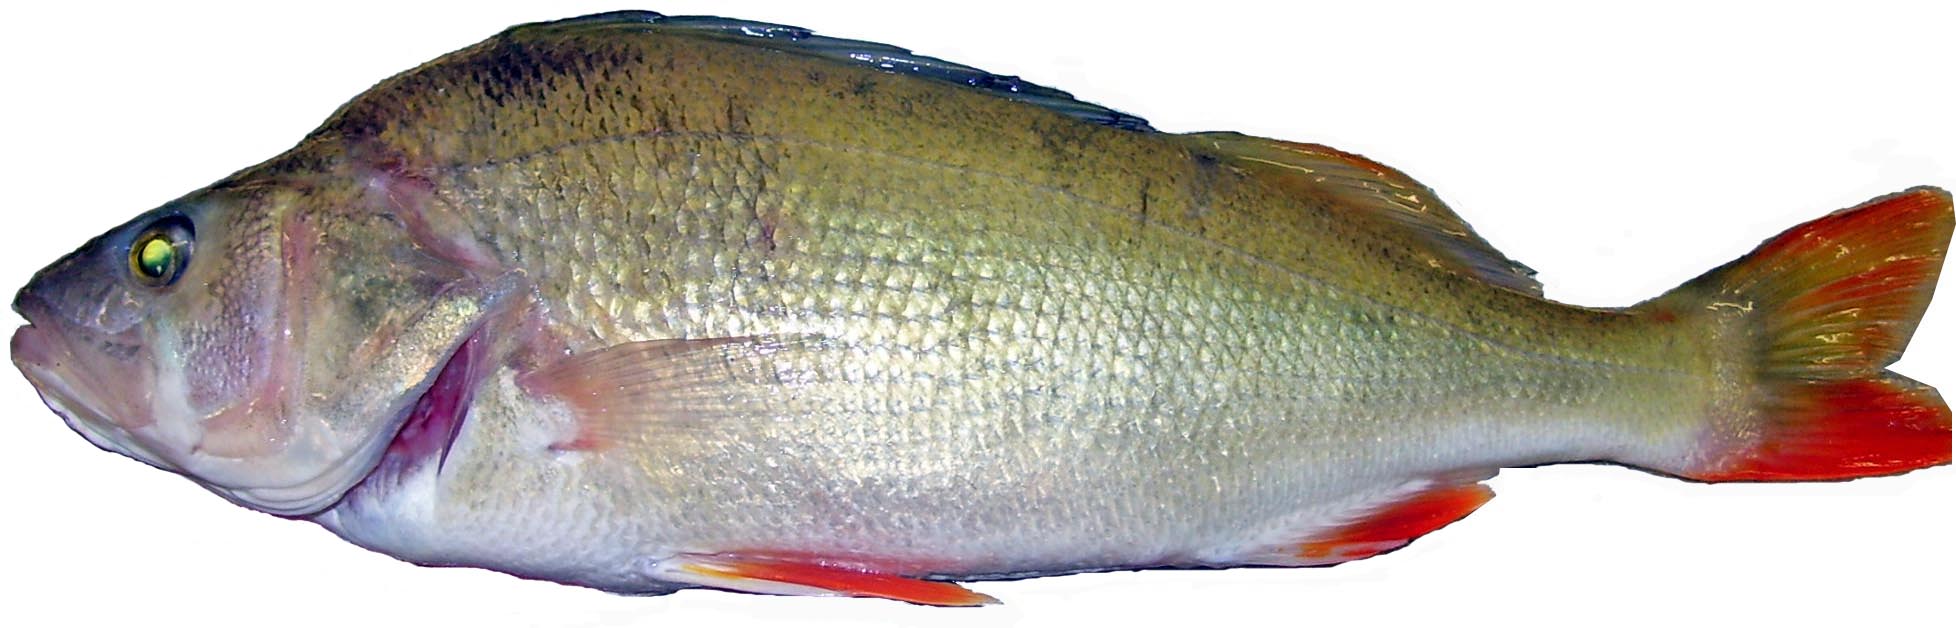 Redfin perch side view photo.